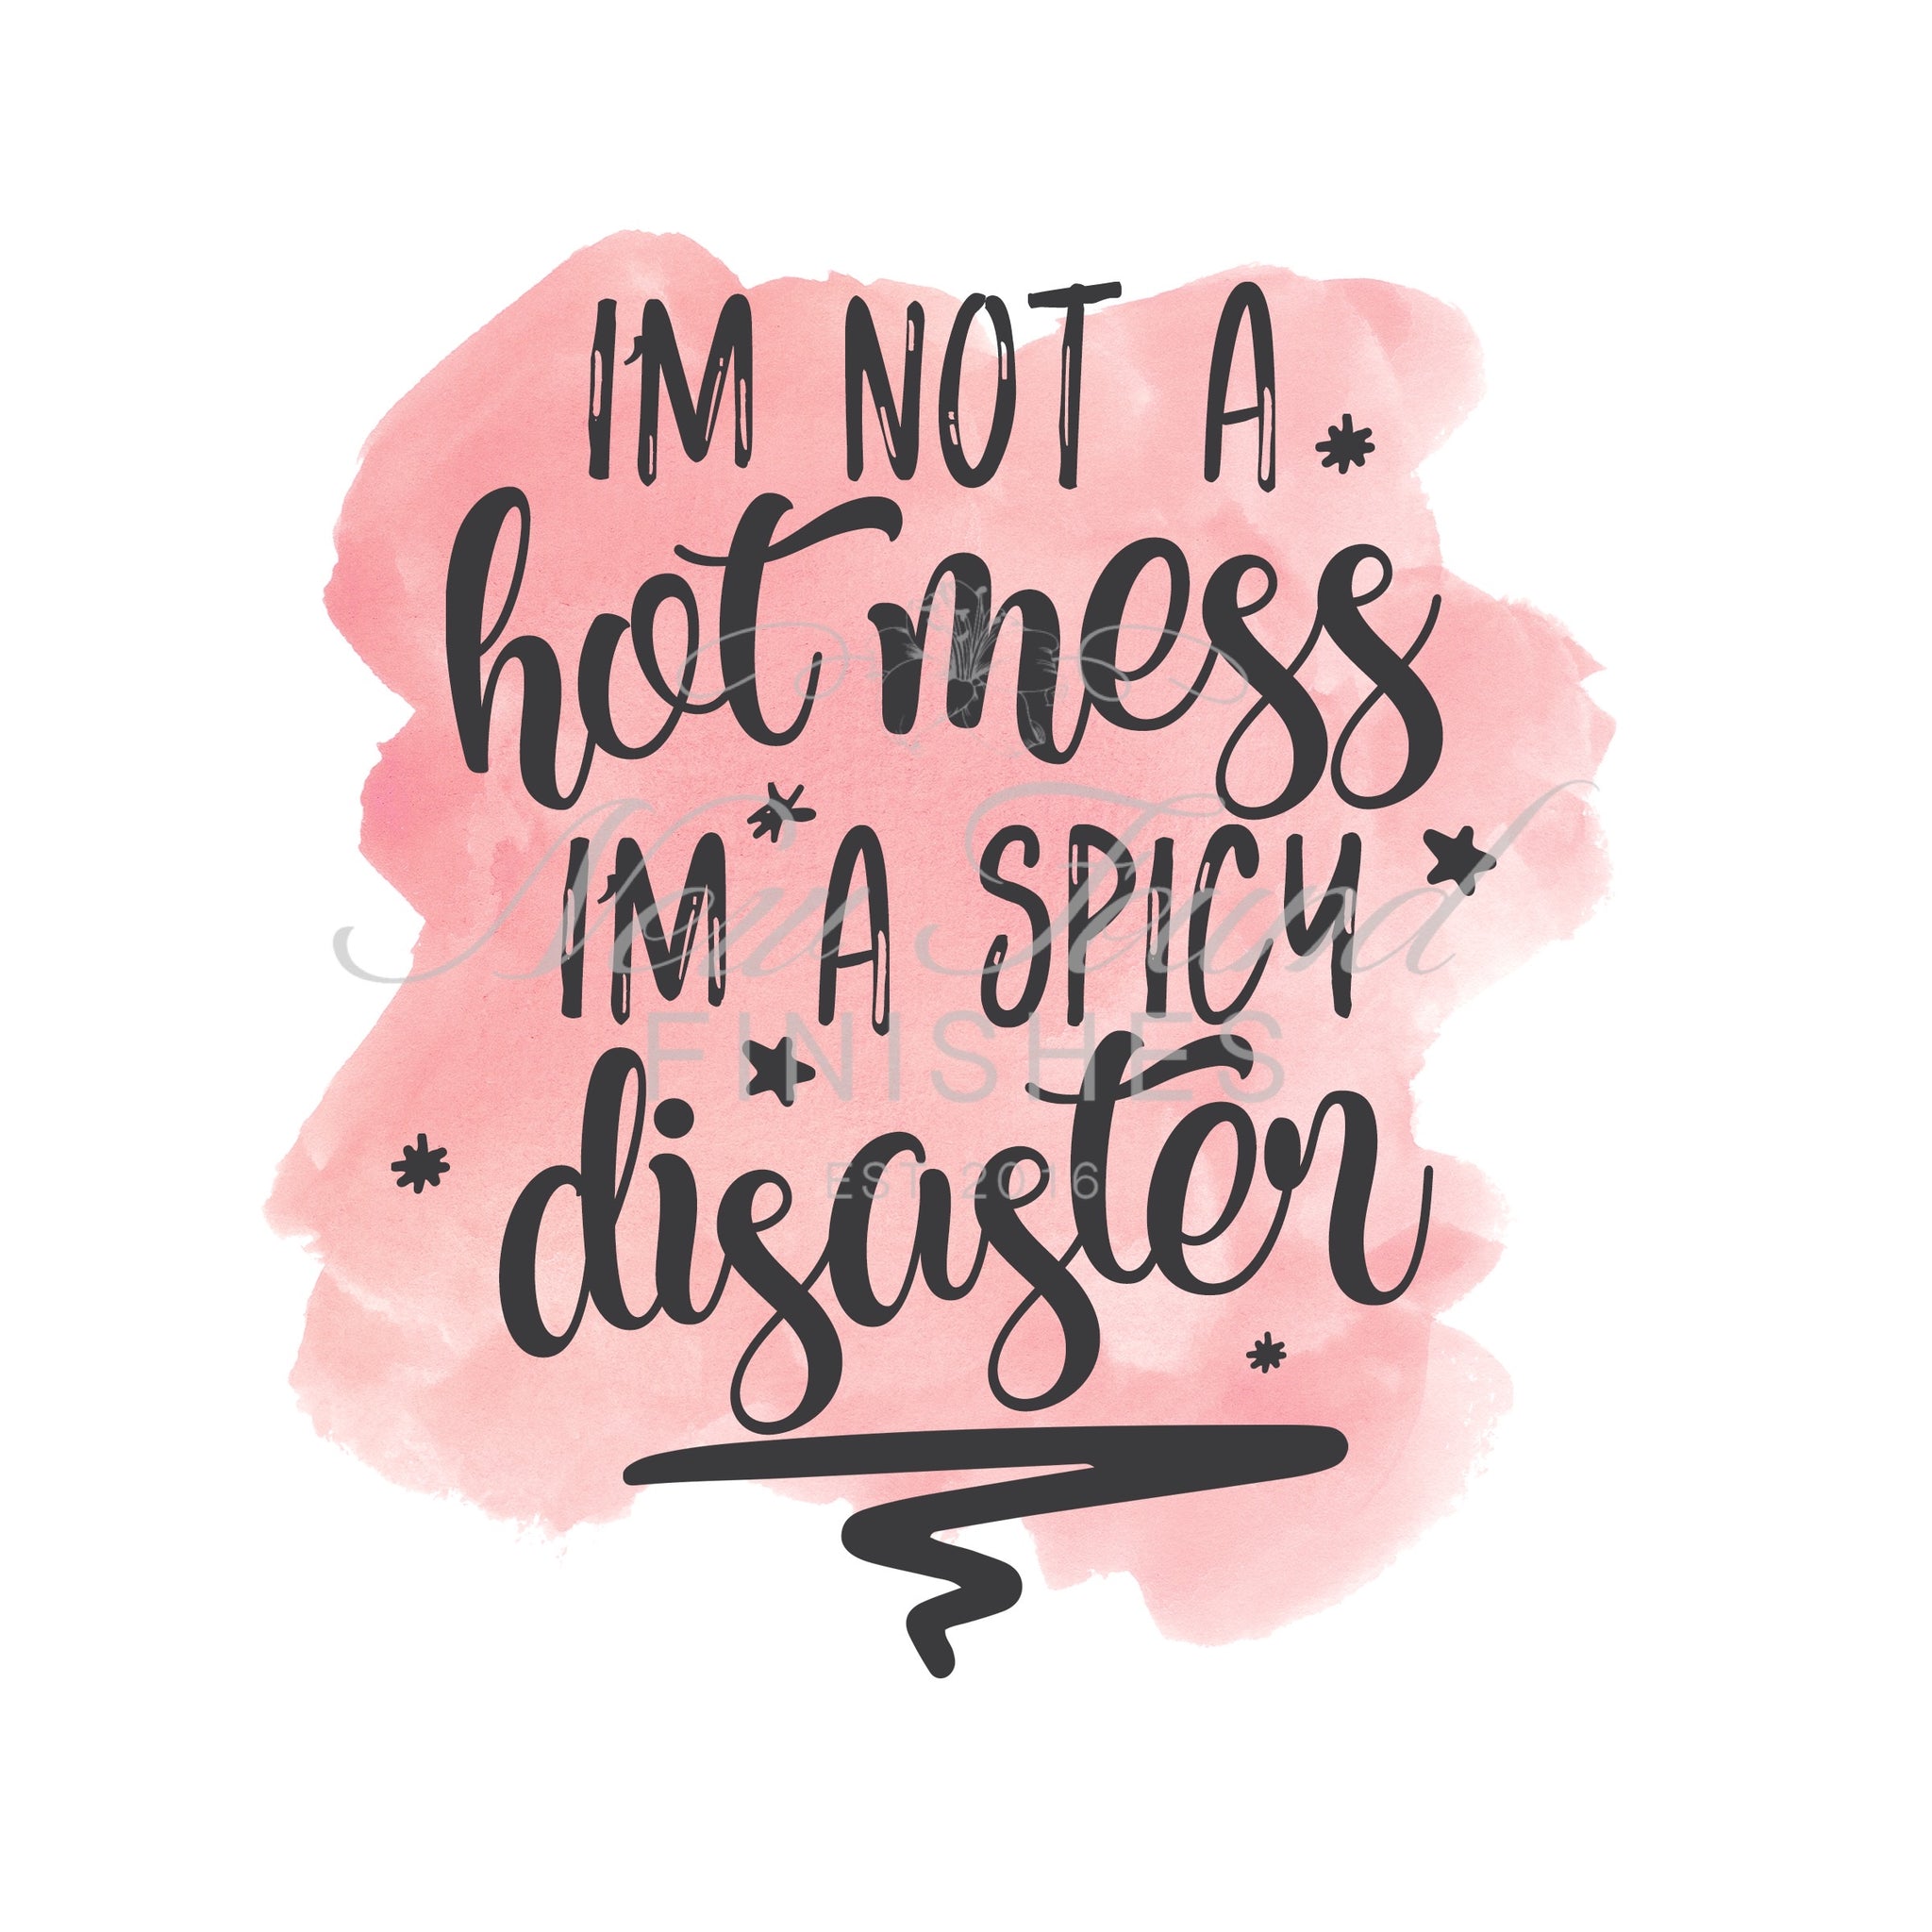 I’m not a hot mess